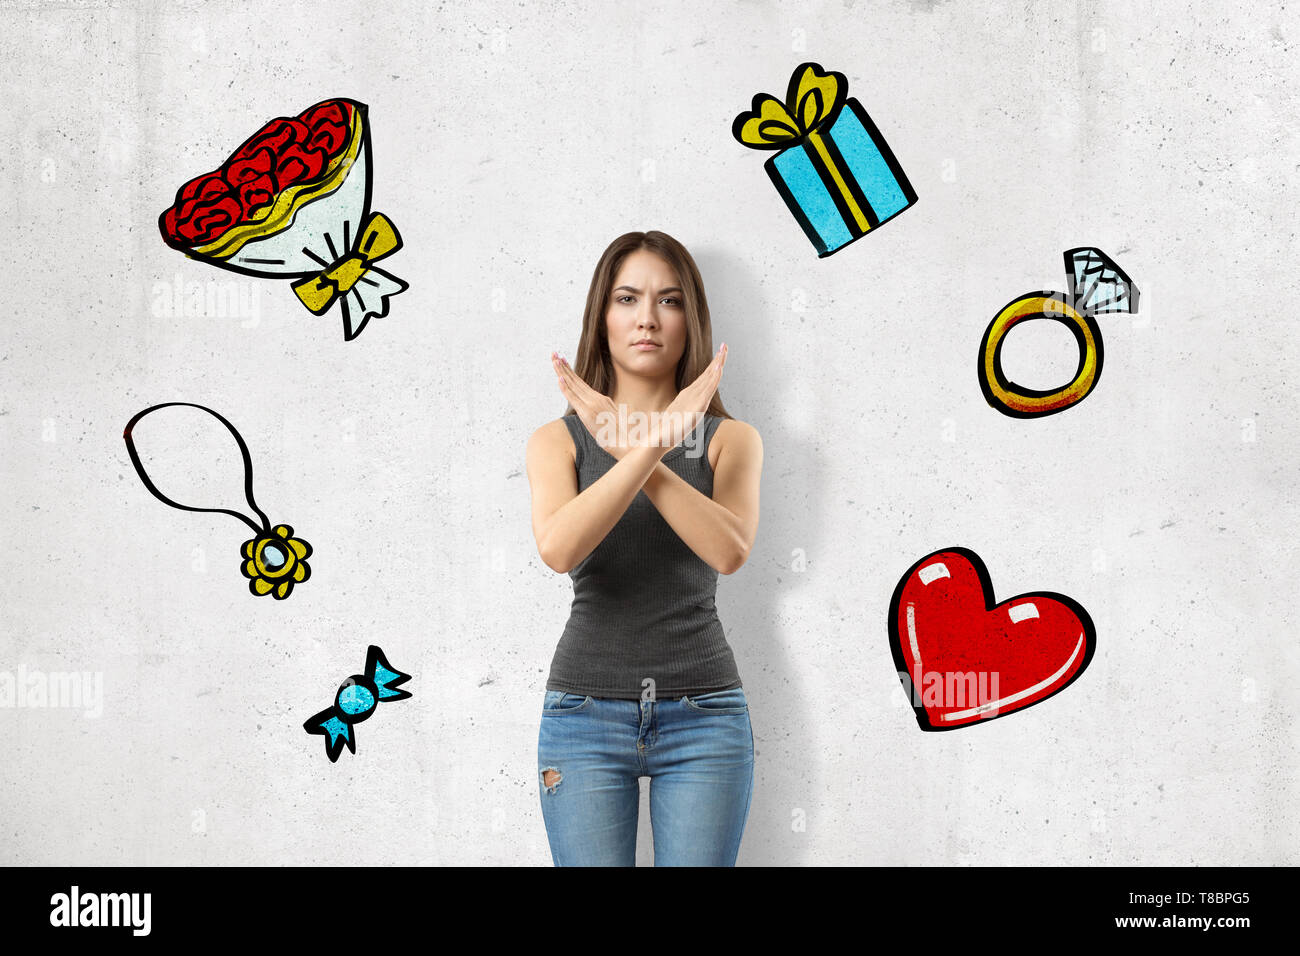 Front view of young angry girl, crossing arms in stop gesture, standing at wall with images of ring, gift, bouquet, heart, candy and jewelry on it. Stock Photo